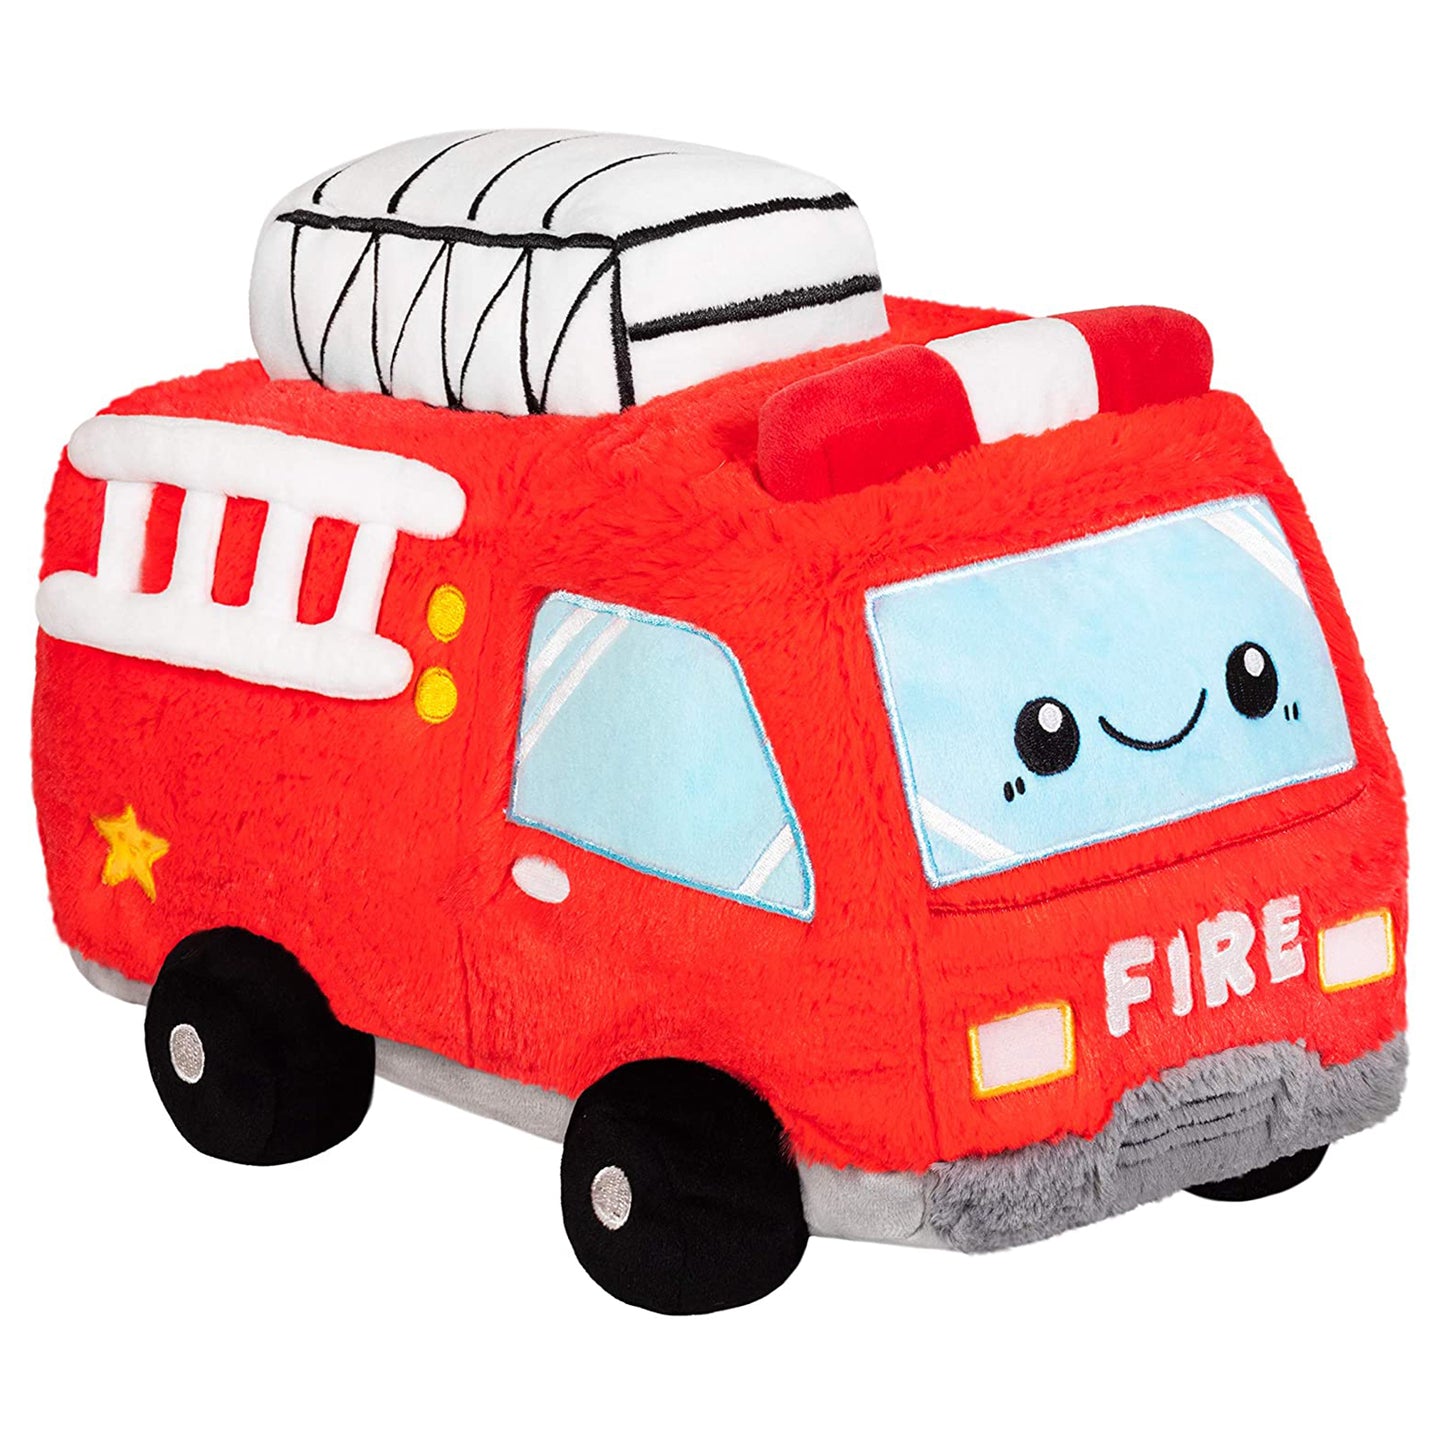 Squishable GO! Fire Truck